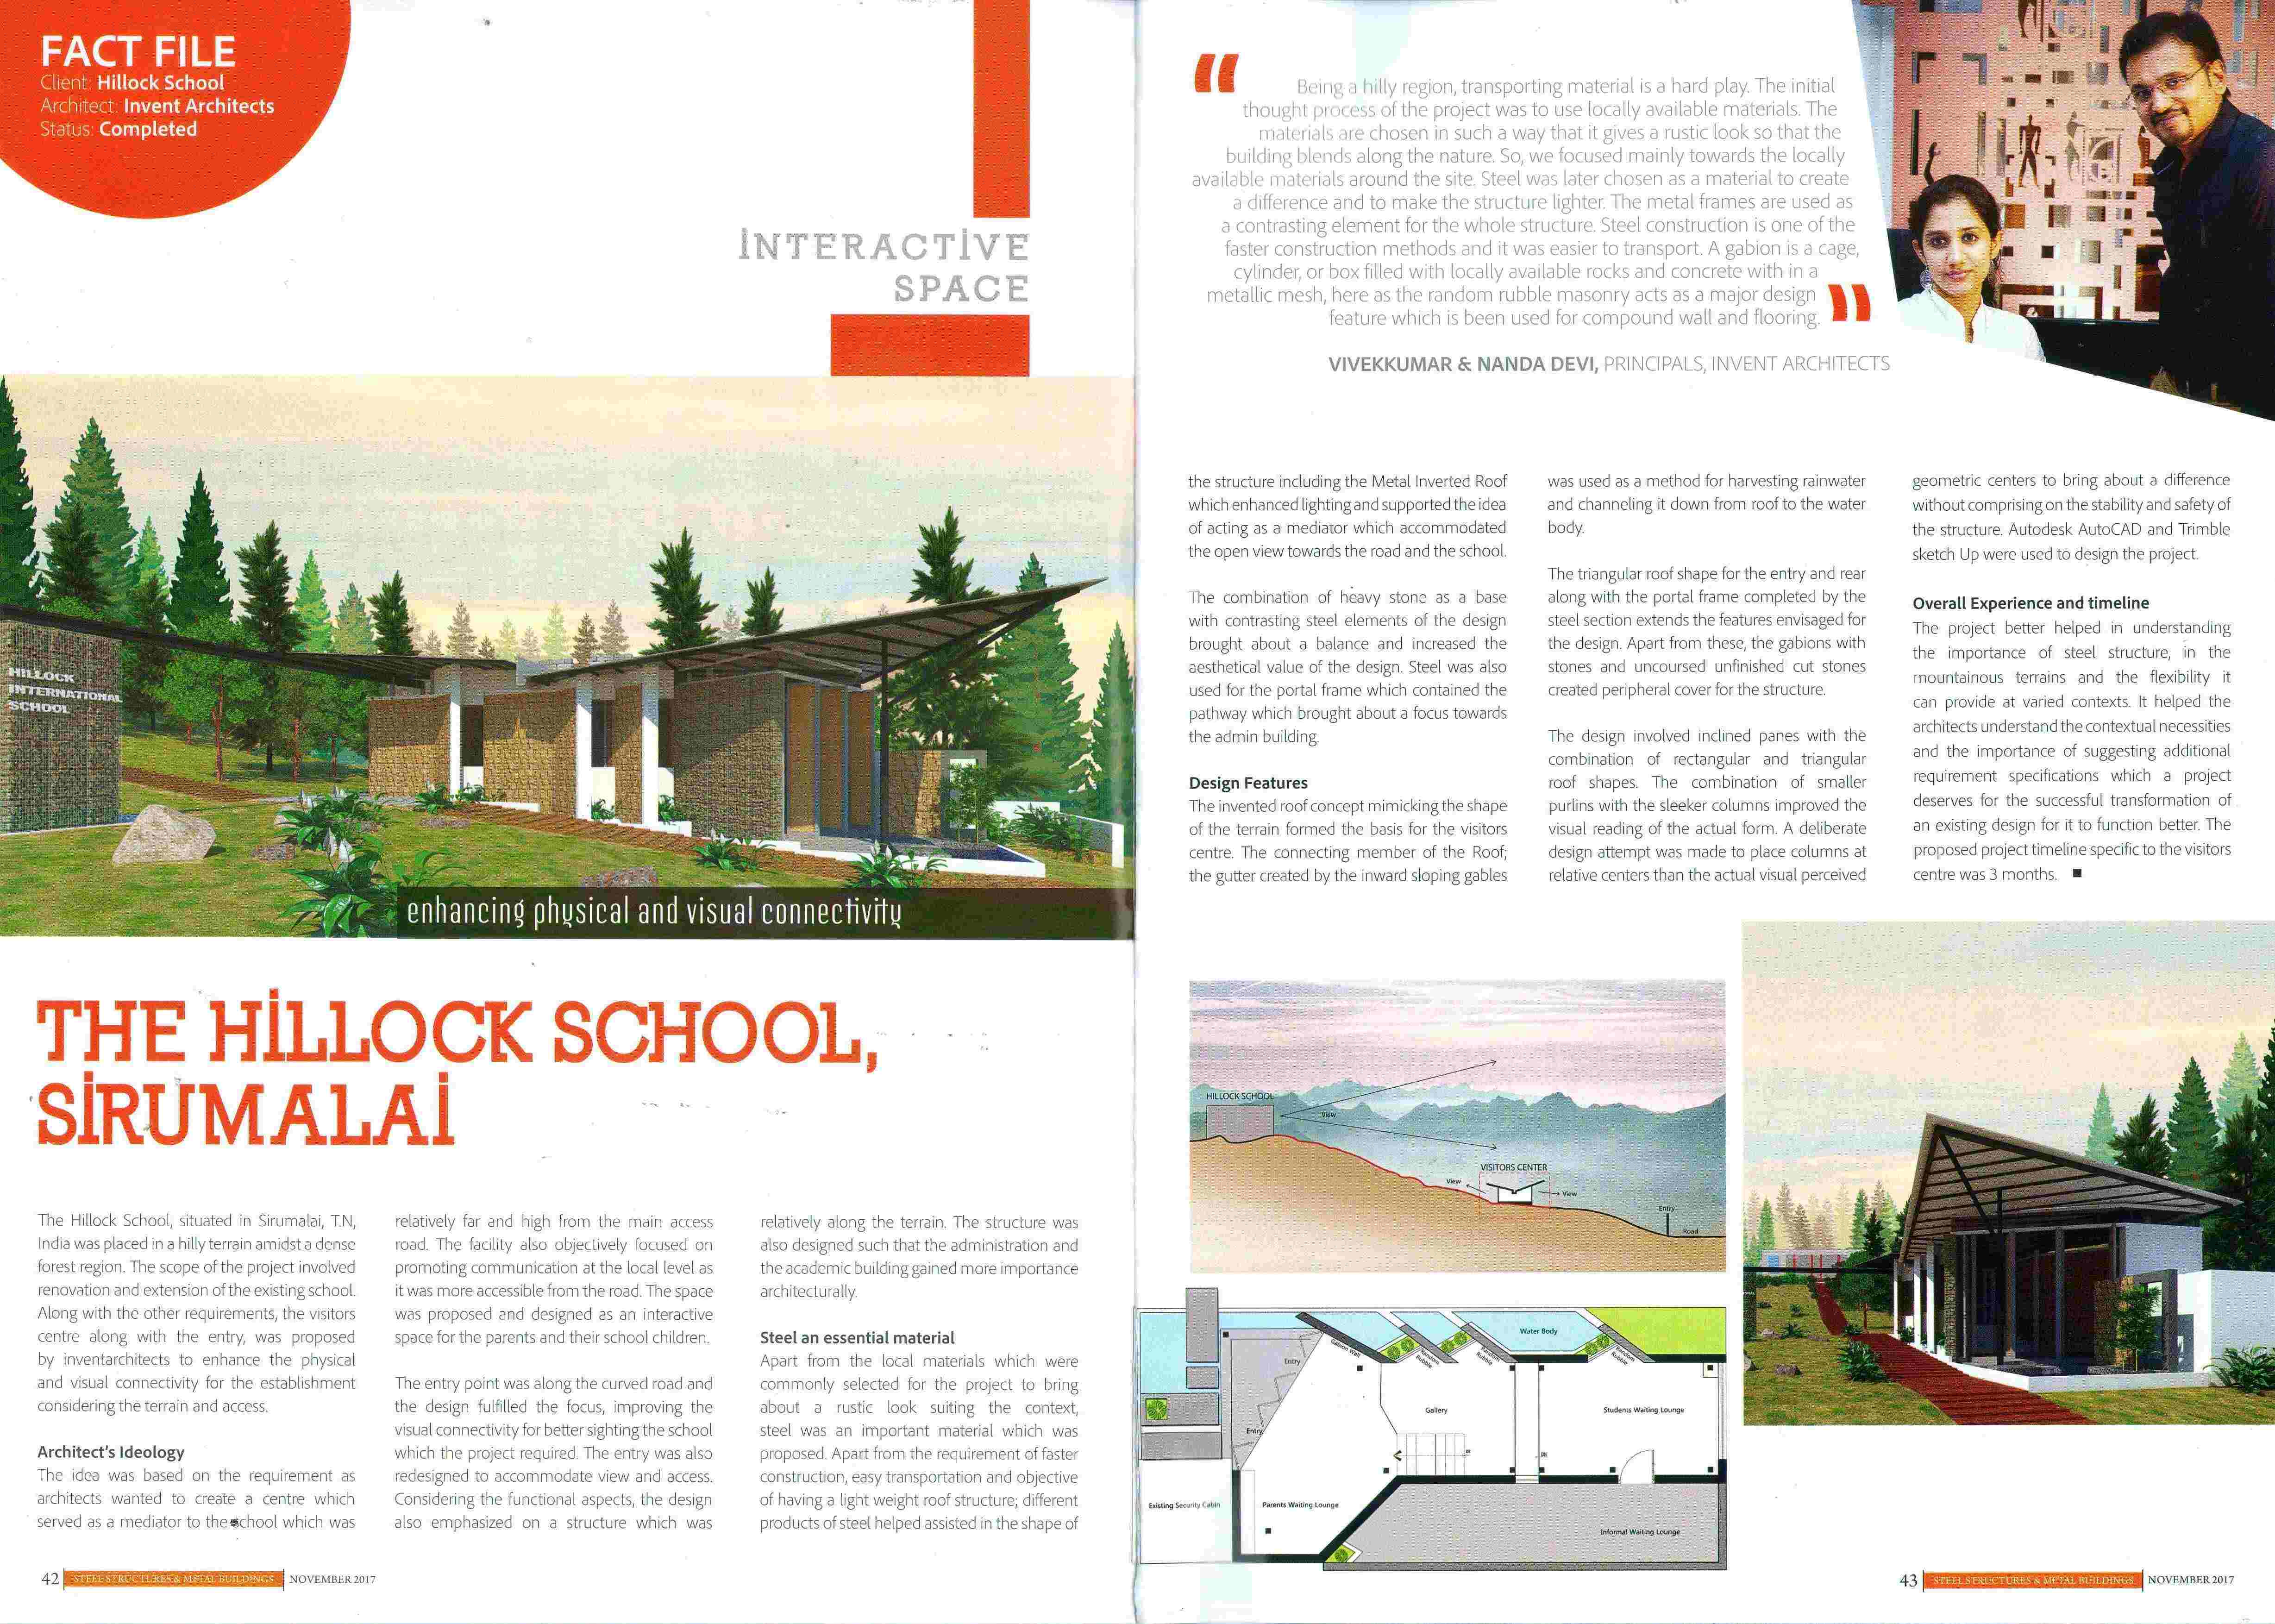 Hillock school designed by inventarchitects